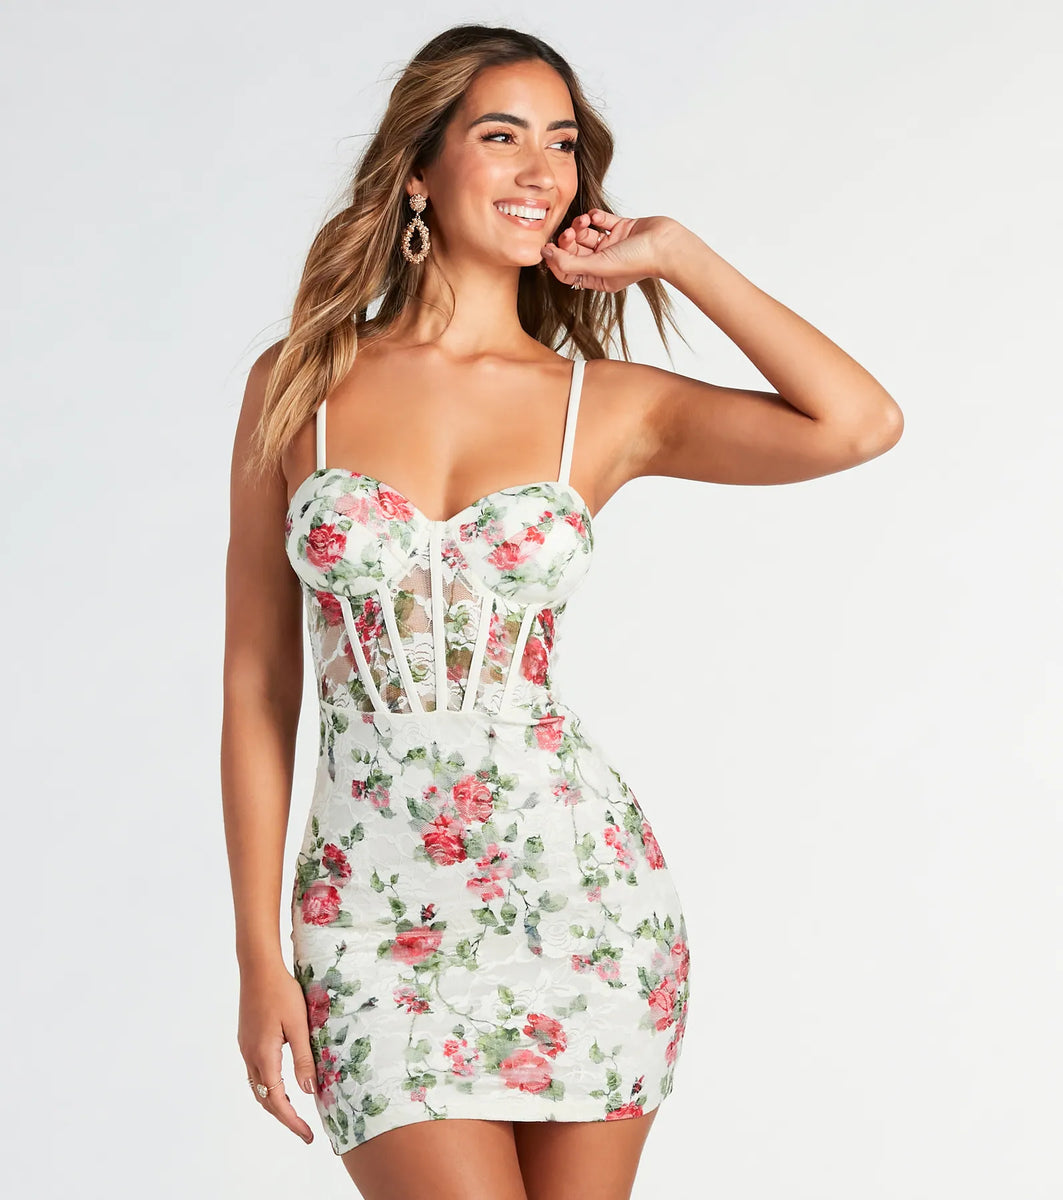 Simply Irresistible Floral Lace Corset Mini Dress